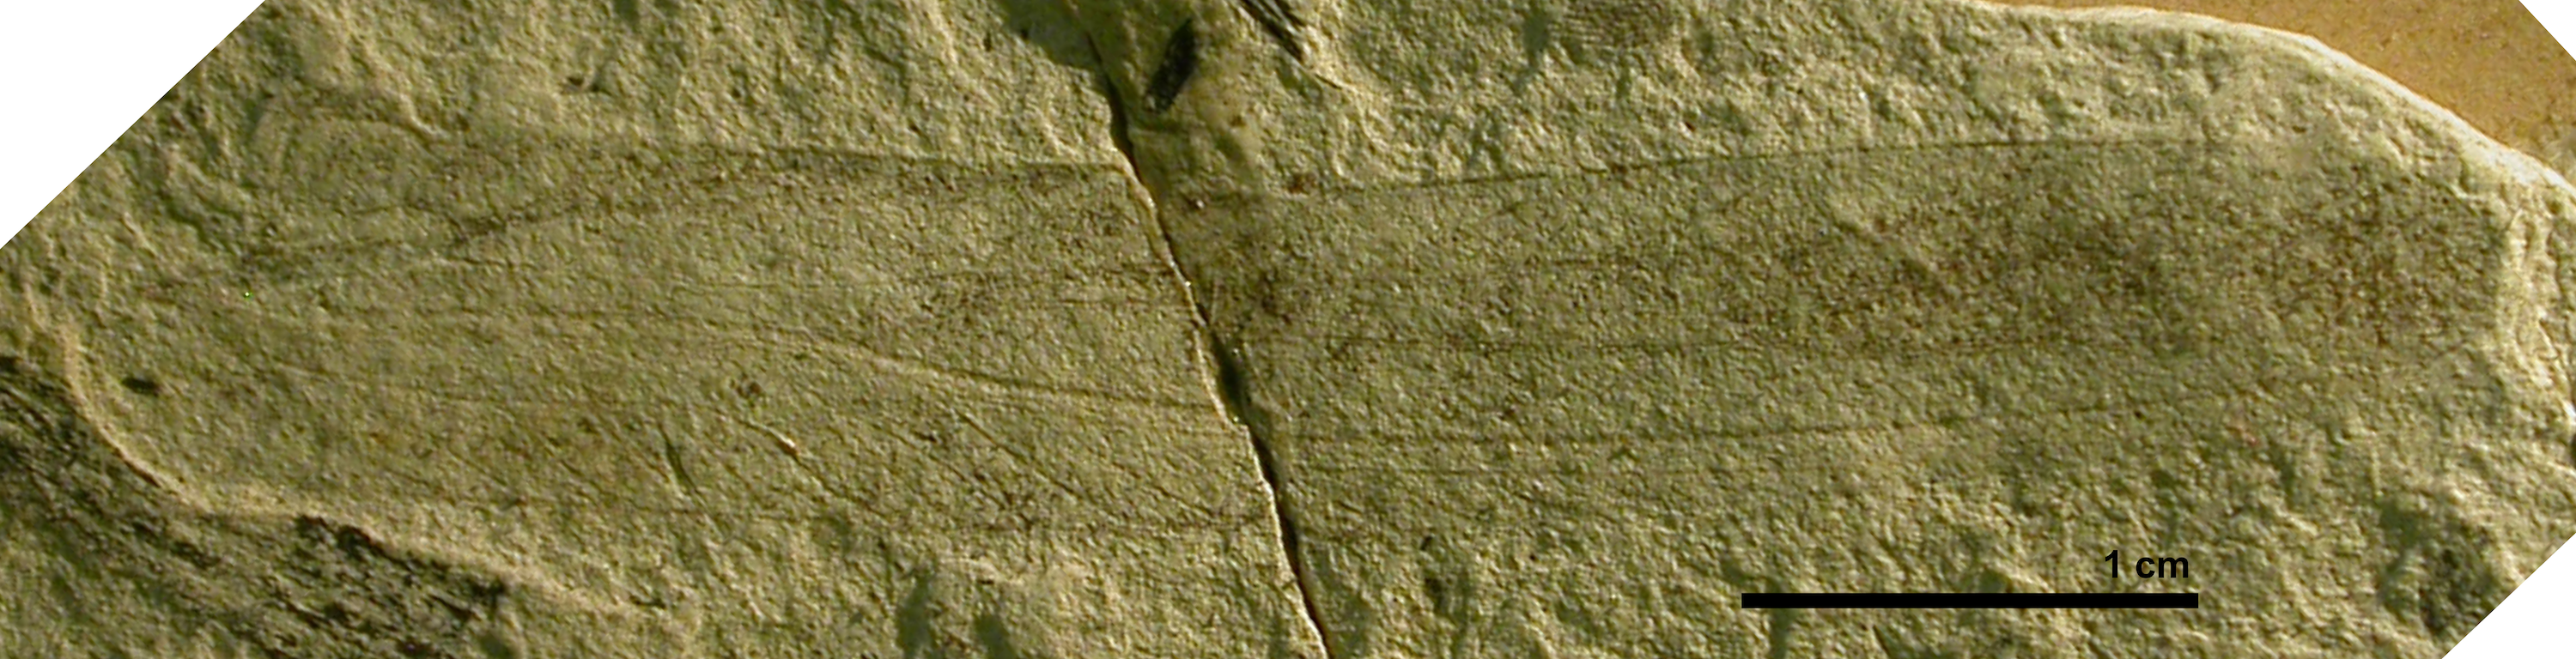 This fossil katydid was collected in Europe.Picture